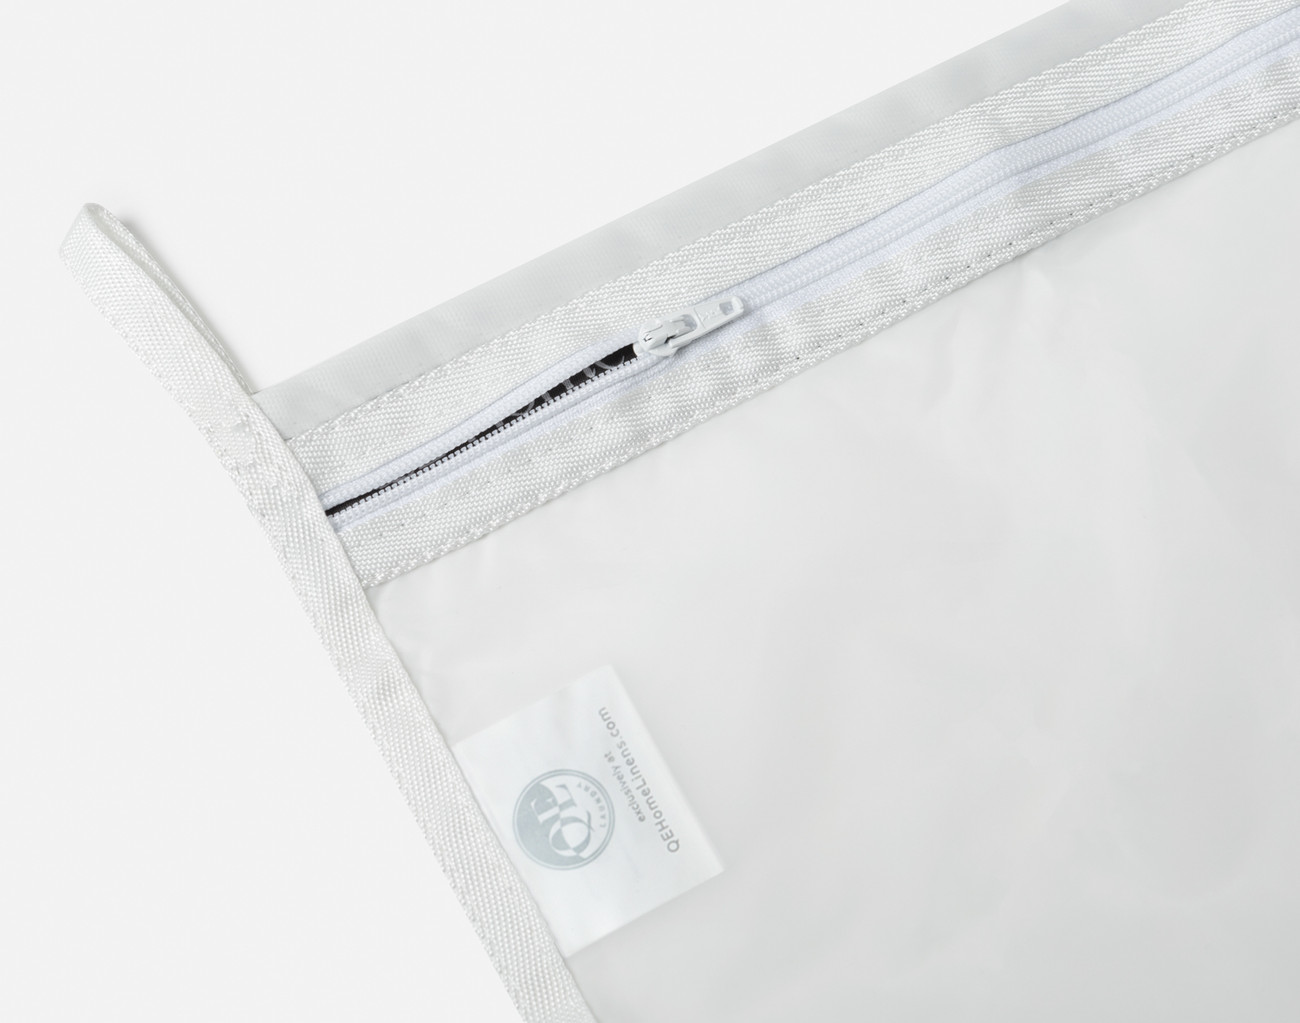 Do Laundry Mesh Bags Protect Your Clothes?